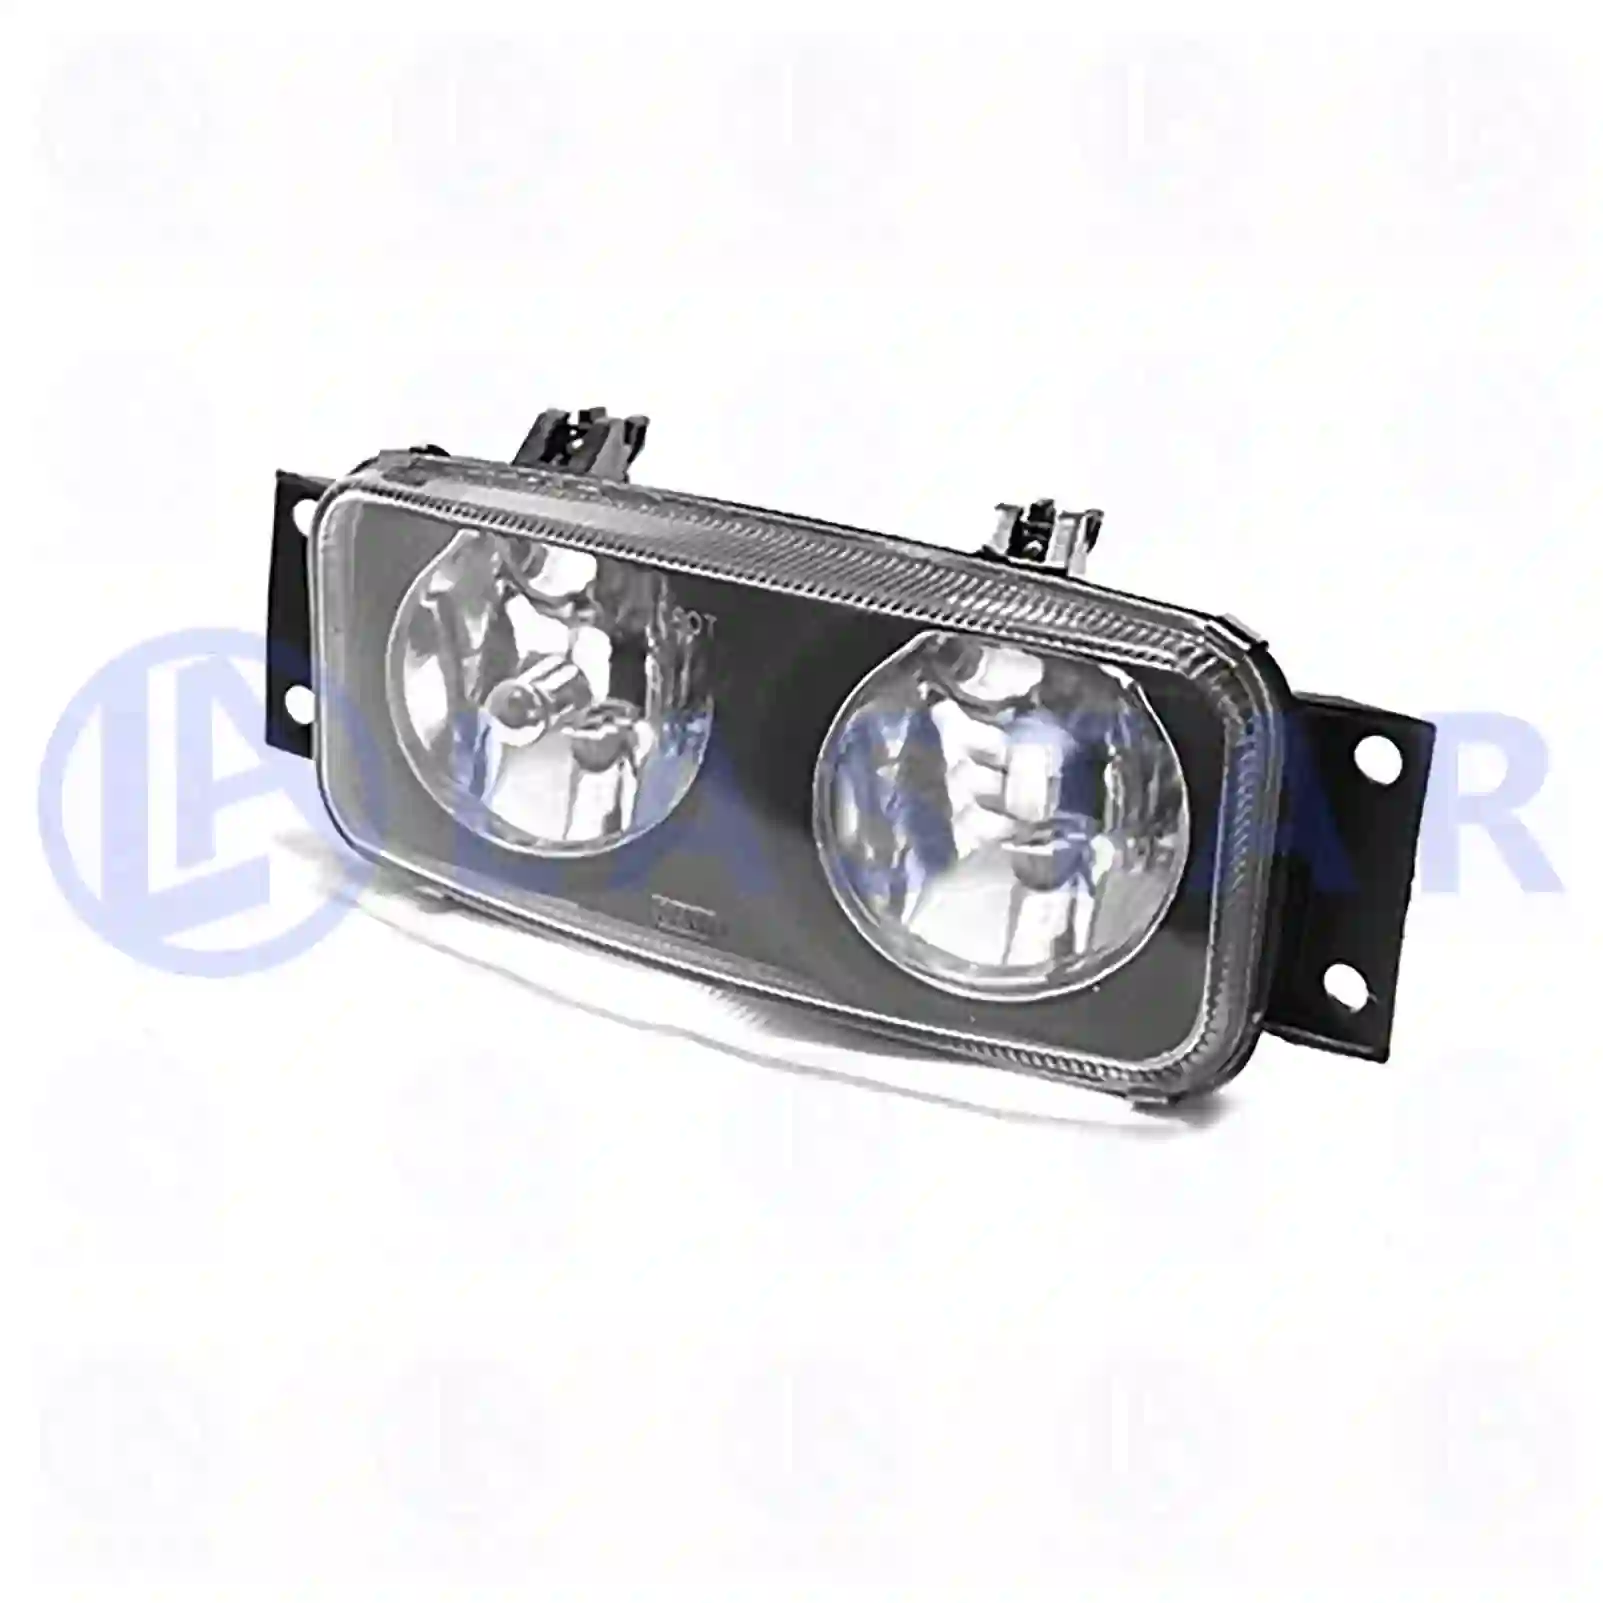 Auxiliary lamp, right, without bulb, 77710809, 1358832, 1400208, 1422992, 1529071, 529071, ZG20264-0008 ||  77710809 Lastar Spare Part | Truck Spare Parts, Auotomotive Spare Parts Auxiliary lamp, right, without bulb, 77710809, 1358832, 1400208, 1422992, 1529071, 529071, ZG20264-0008 ||  77710809 Lastar Spare Part | Truck Spare Parts, Auotomotive Spare Parts